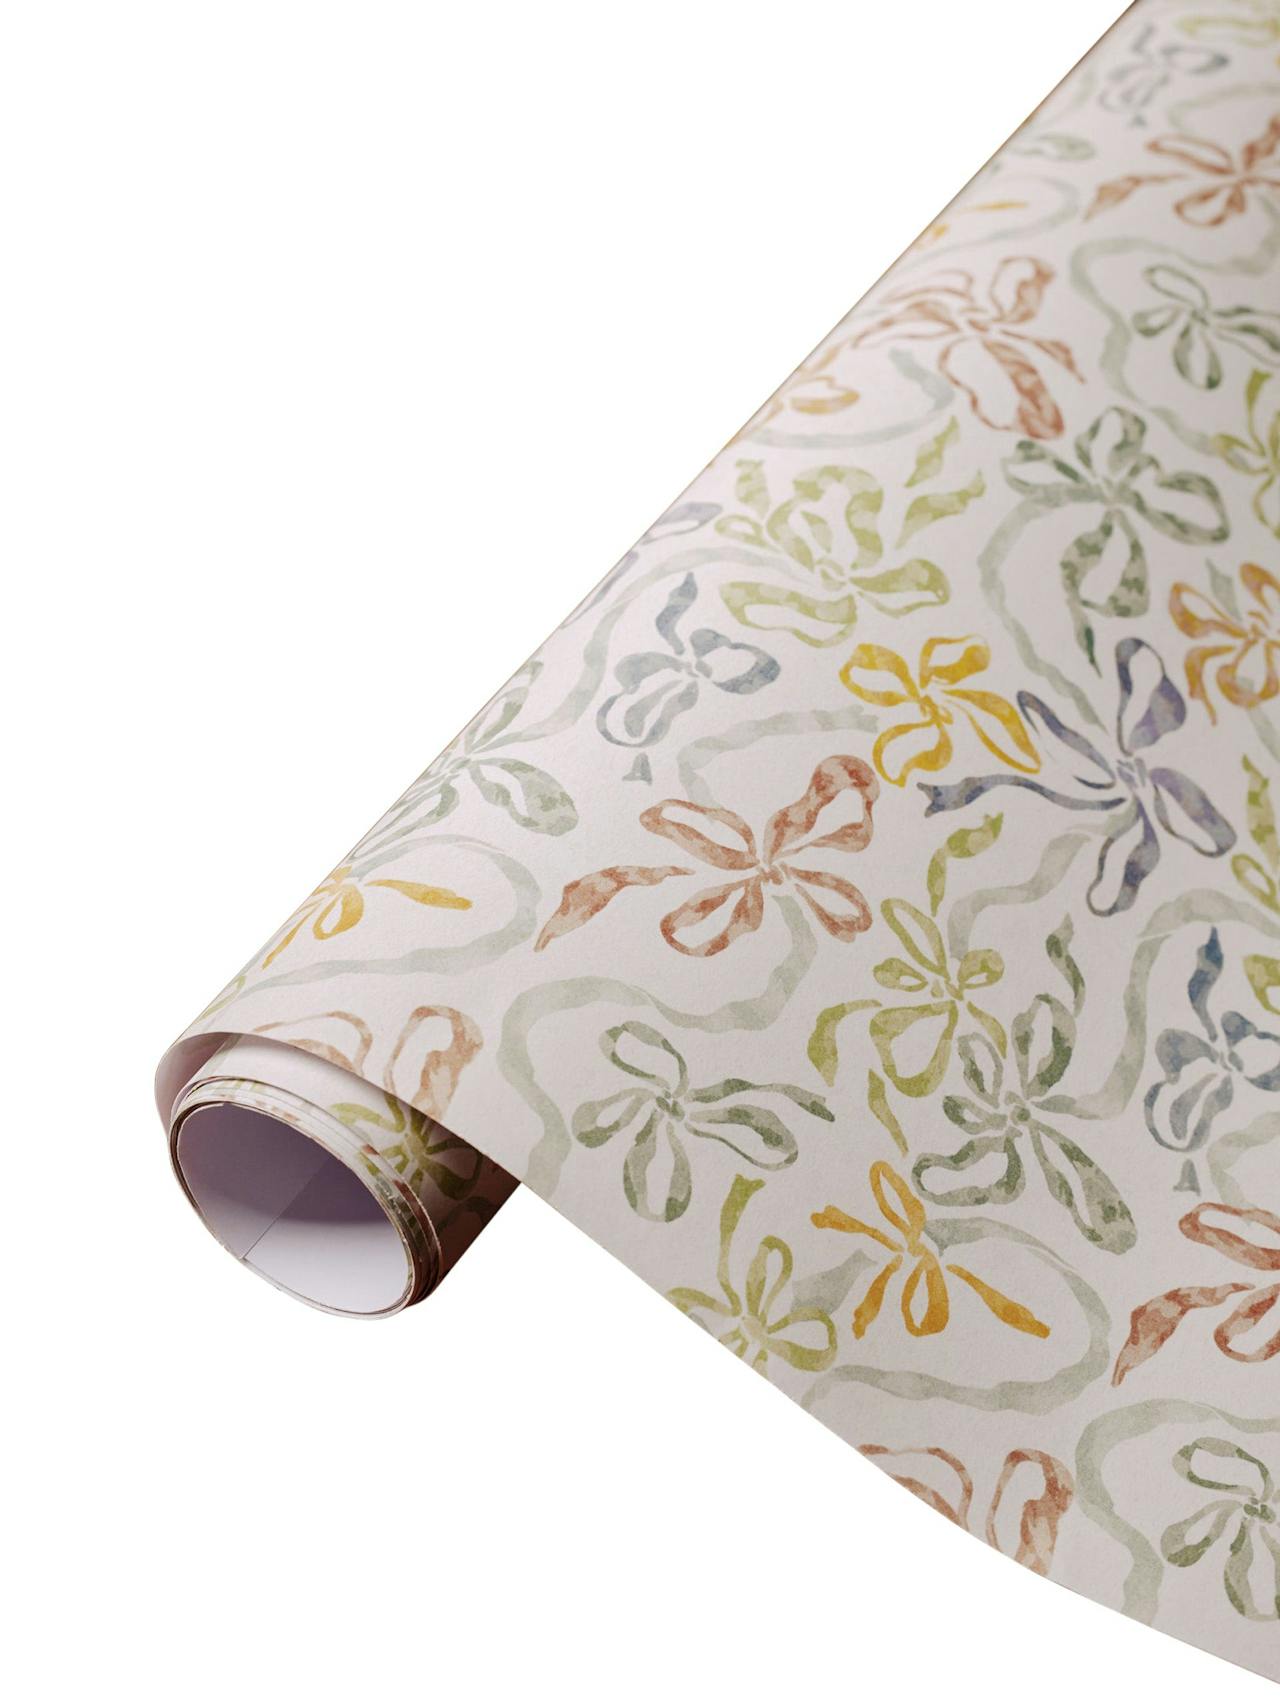 Party Bows gift wrap roll